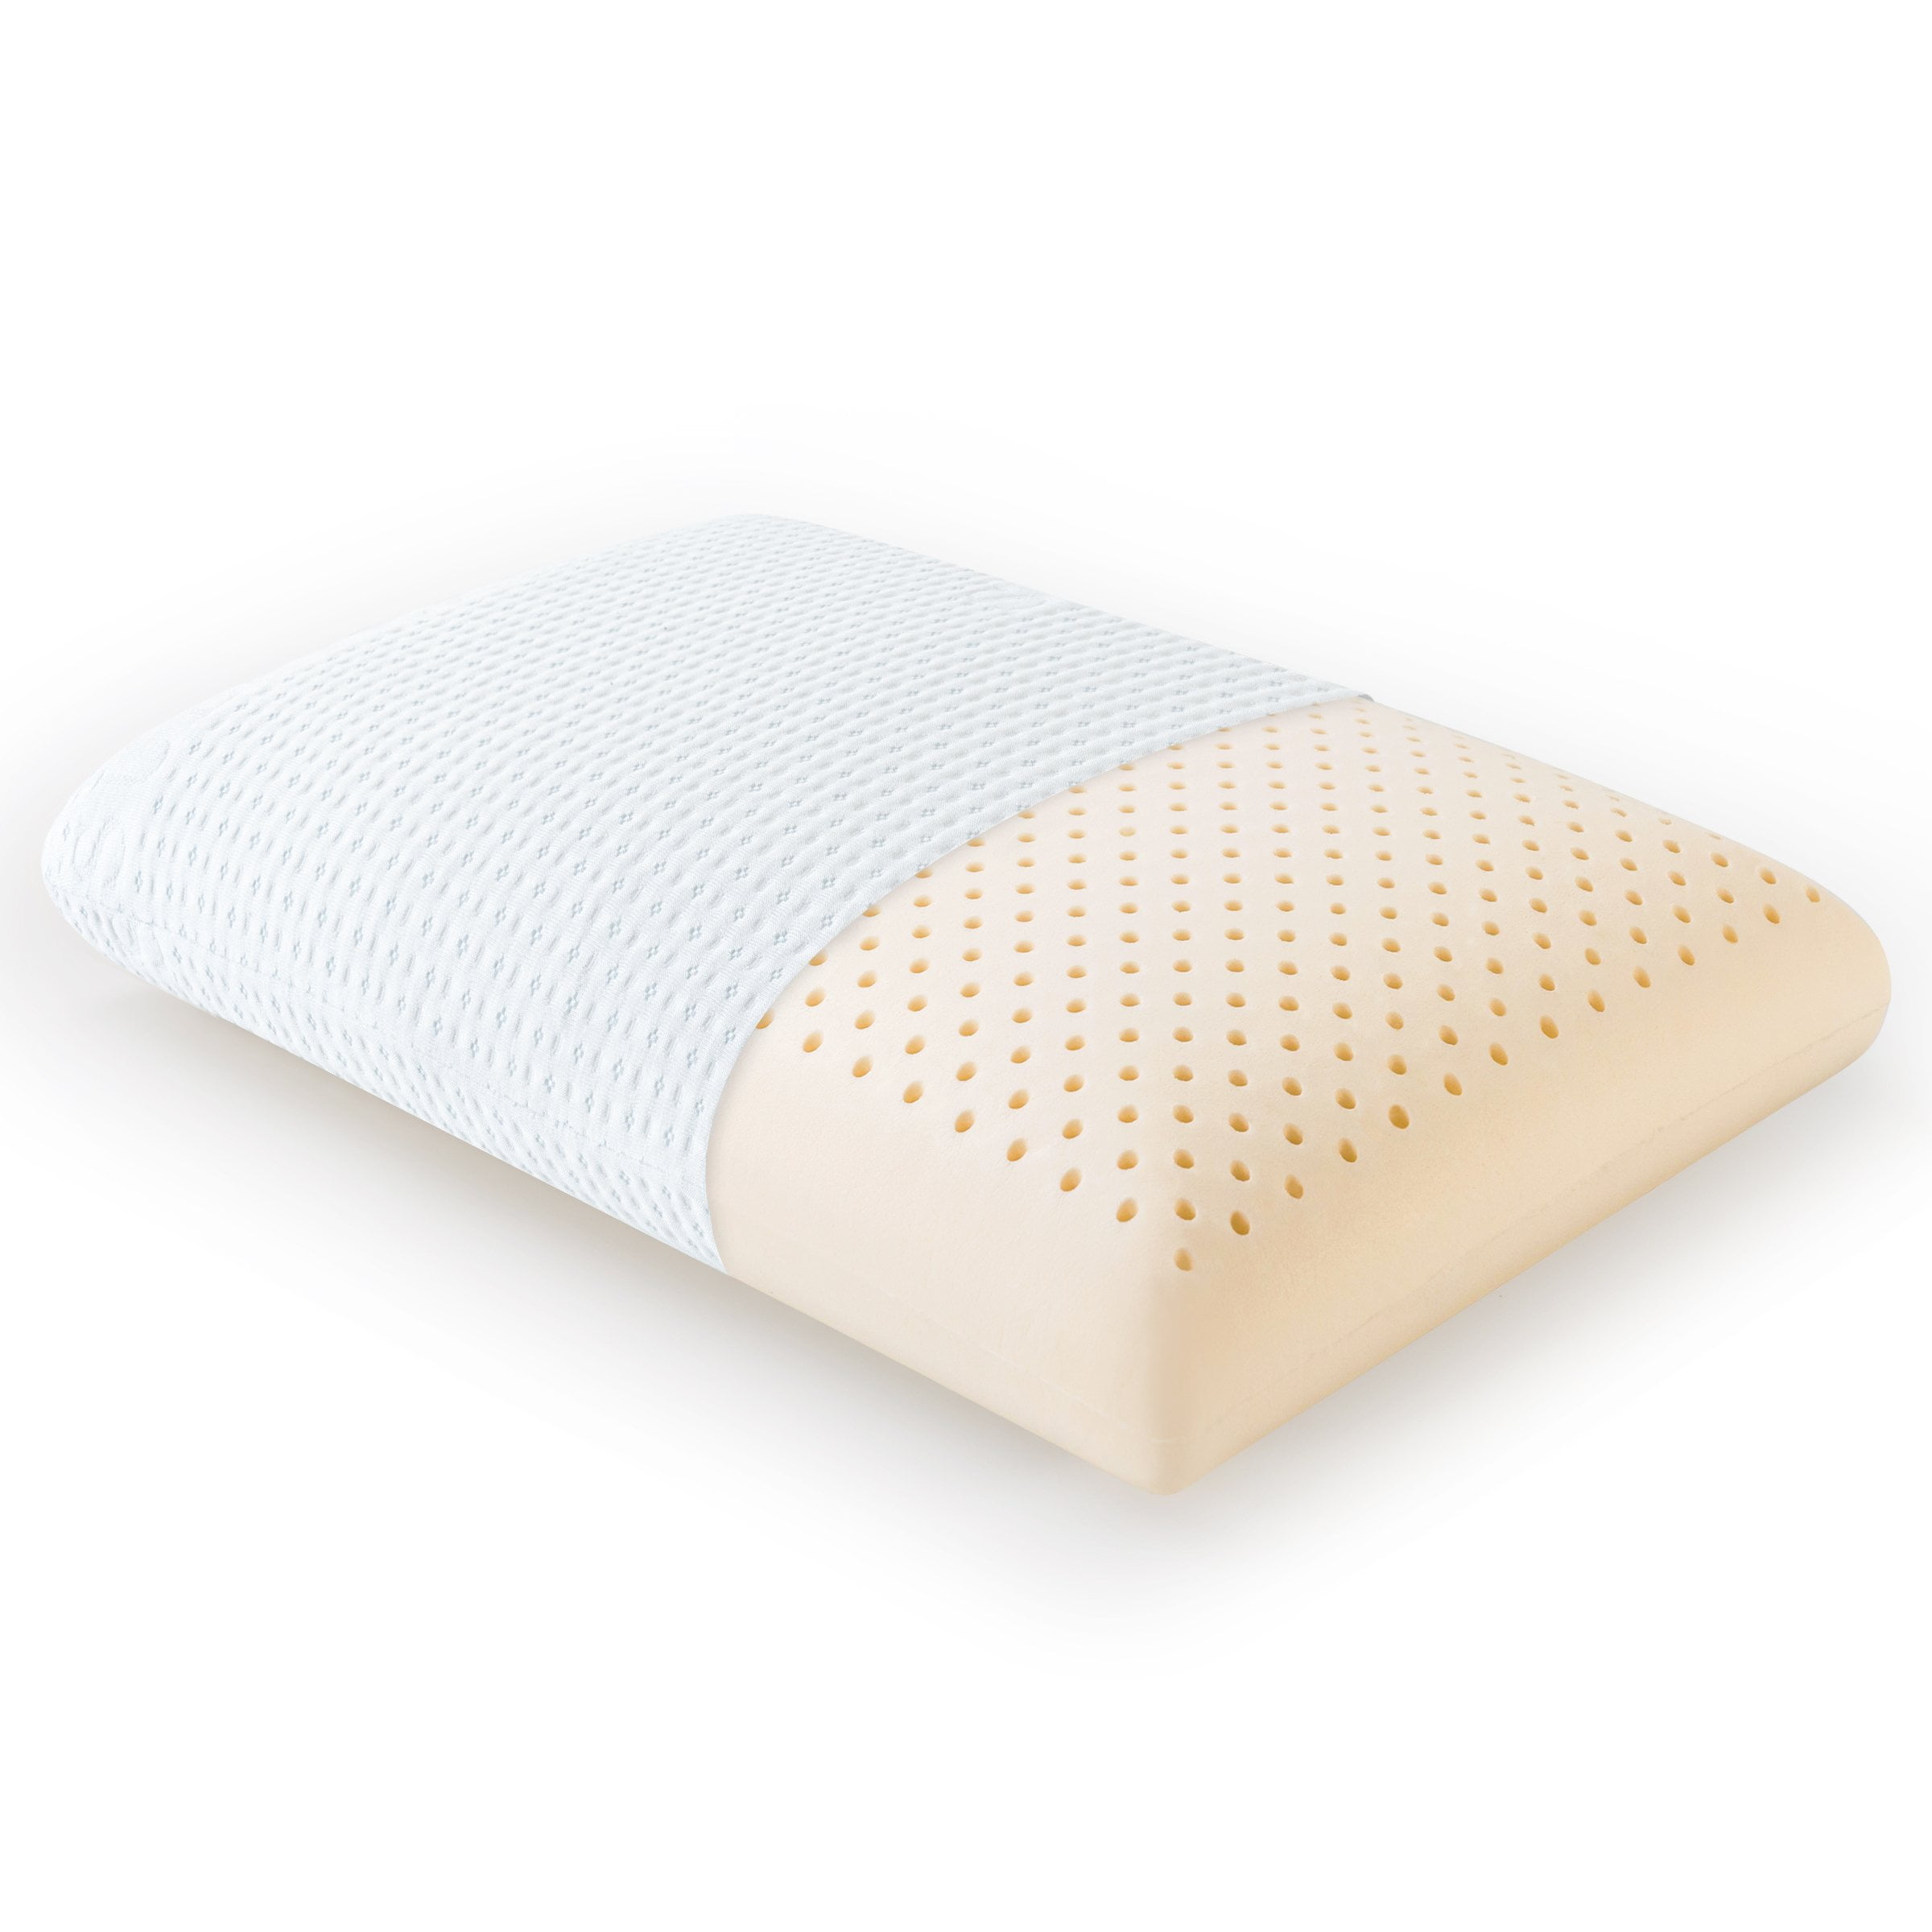 with 100% Organic Cotton Cover Protector Back and Side Sleepers Natural Latex Pillow Sleeping Support Queen Size, Firm Helps Relieve Pressure